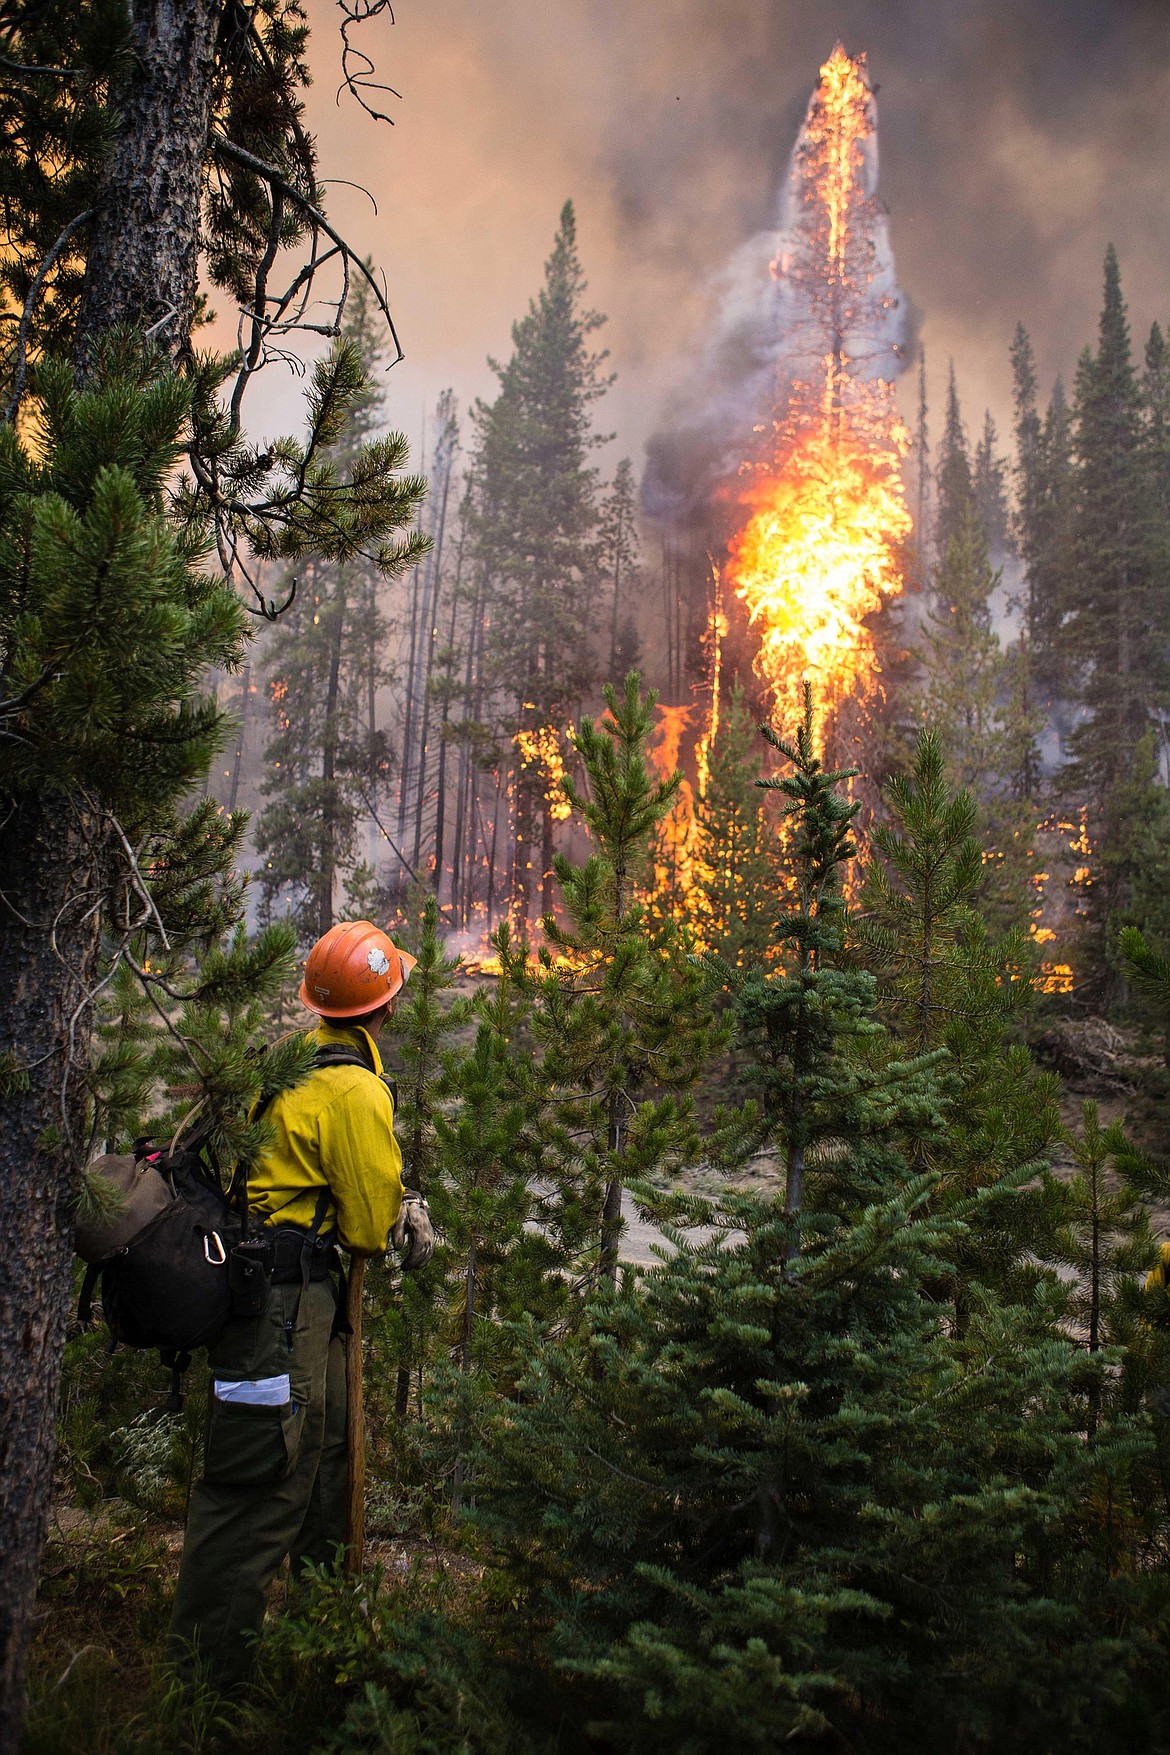 FILE - In this Aug. 7, 2019 file photo released by U.S. Forest Service, a firefighter watches flames from the Nethker Fire engulf trees at Payette National Forest near McCall, Idaho. A giant Idaho forest project favored by some environmental groups but decried by others is on hold again following a federal court ruling. The decision Tuesday, Aug. 11, 2020, halts for the second time a 125-square-mile project on the Payette National Forest that includes commercial timber sales, work to improve fish passage, prescribed burning, the closing of some roads and restoration of Ponderosa pine ecosystems. (U.S. Forest Service via AP, File)